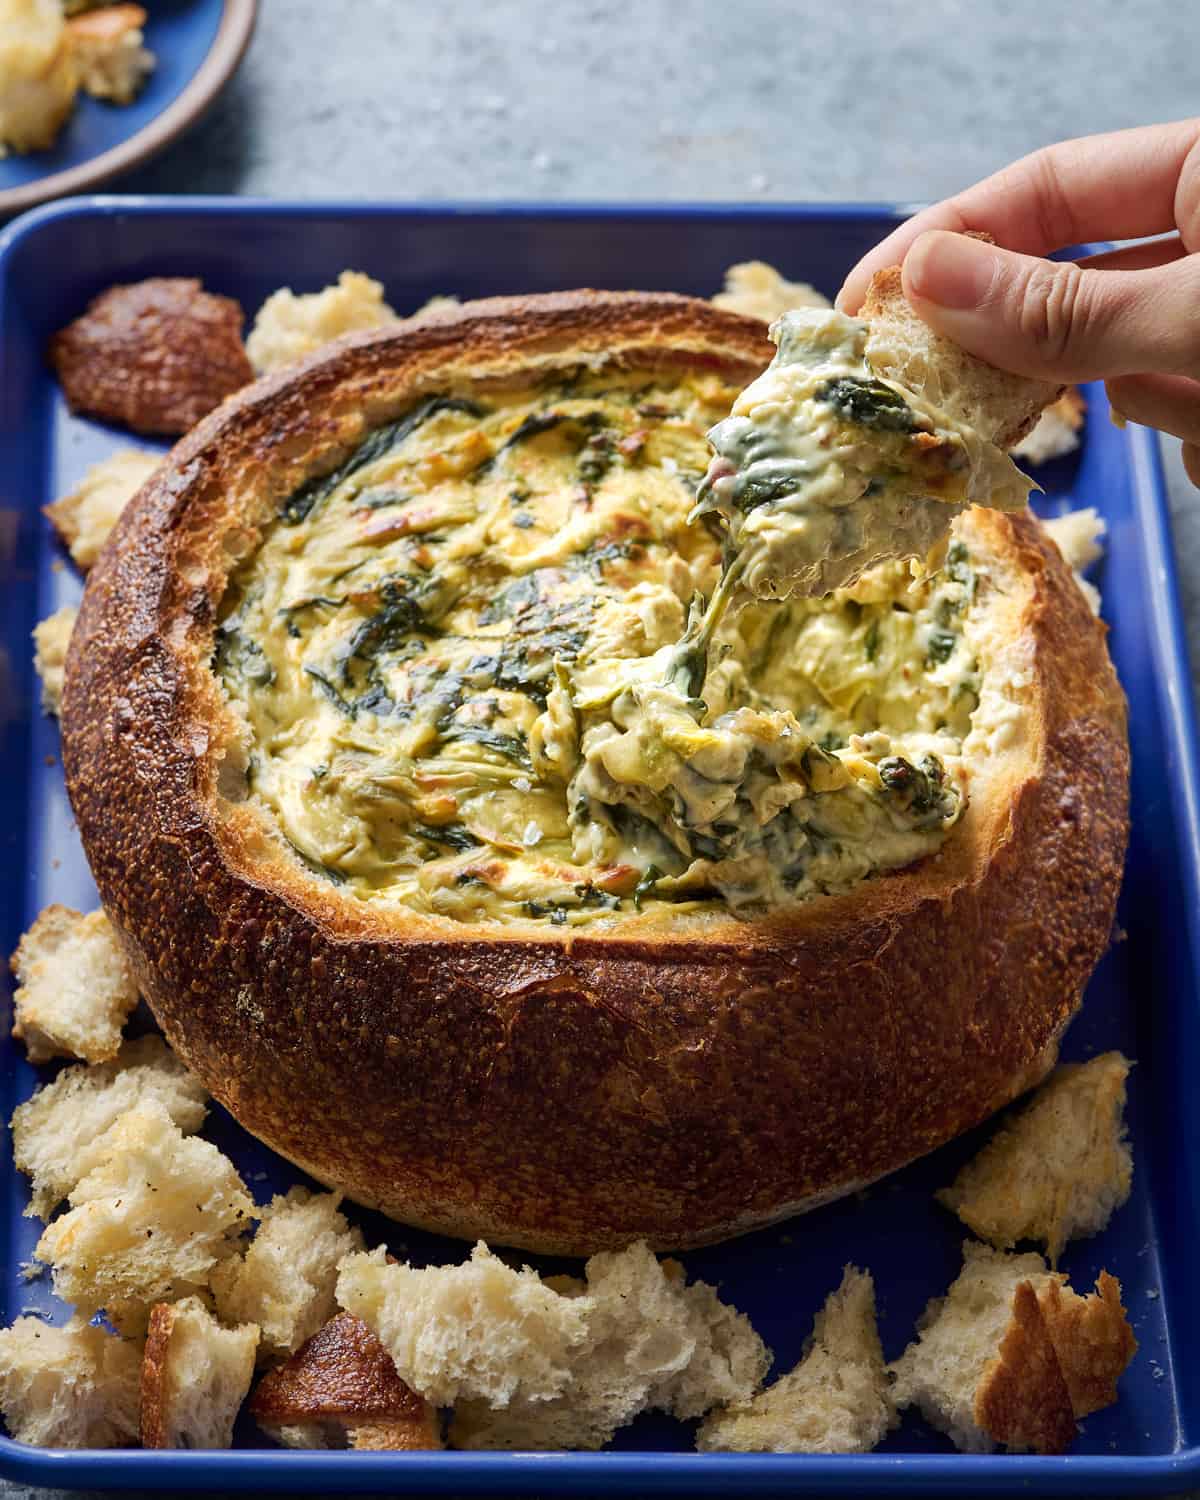 A person is dipping bread into a bowl of spinach dip.